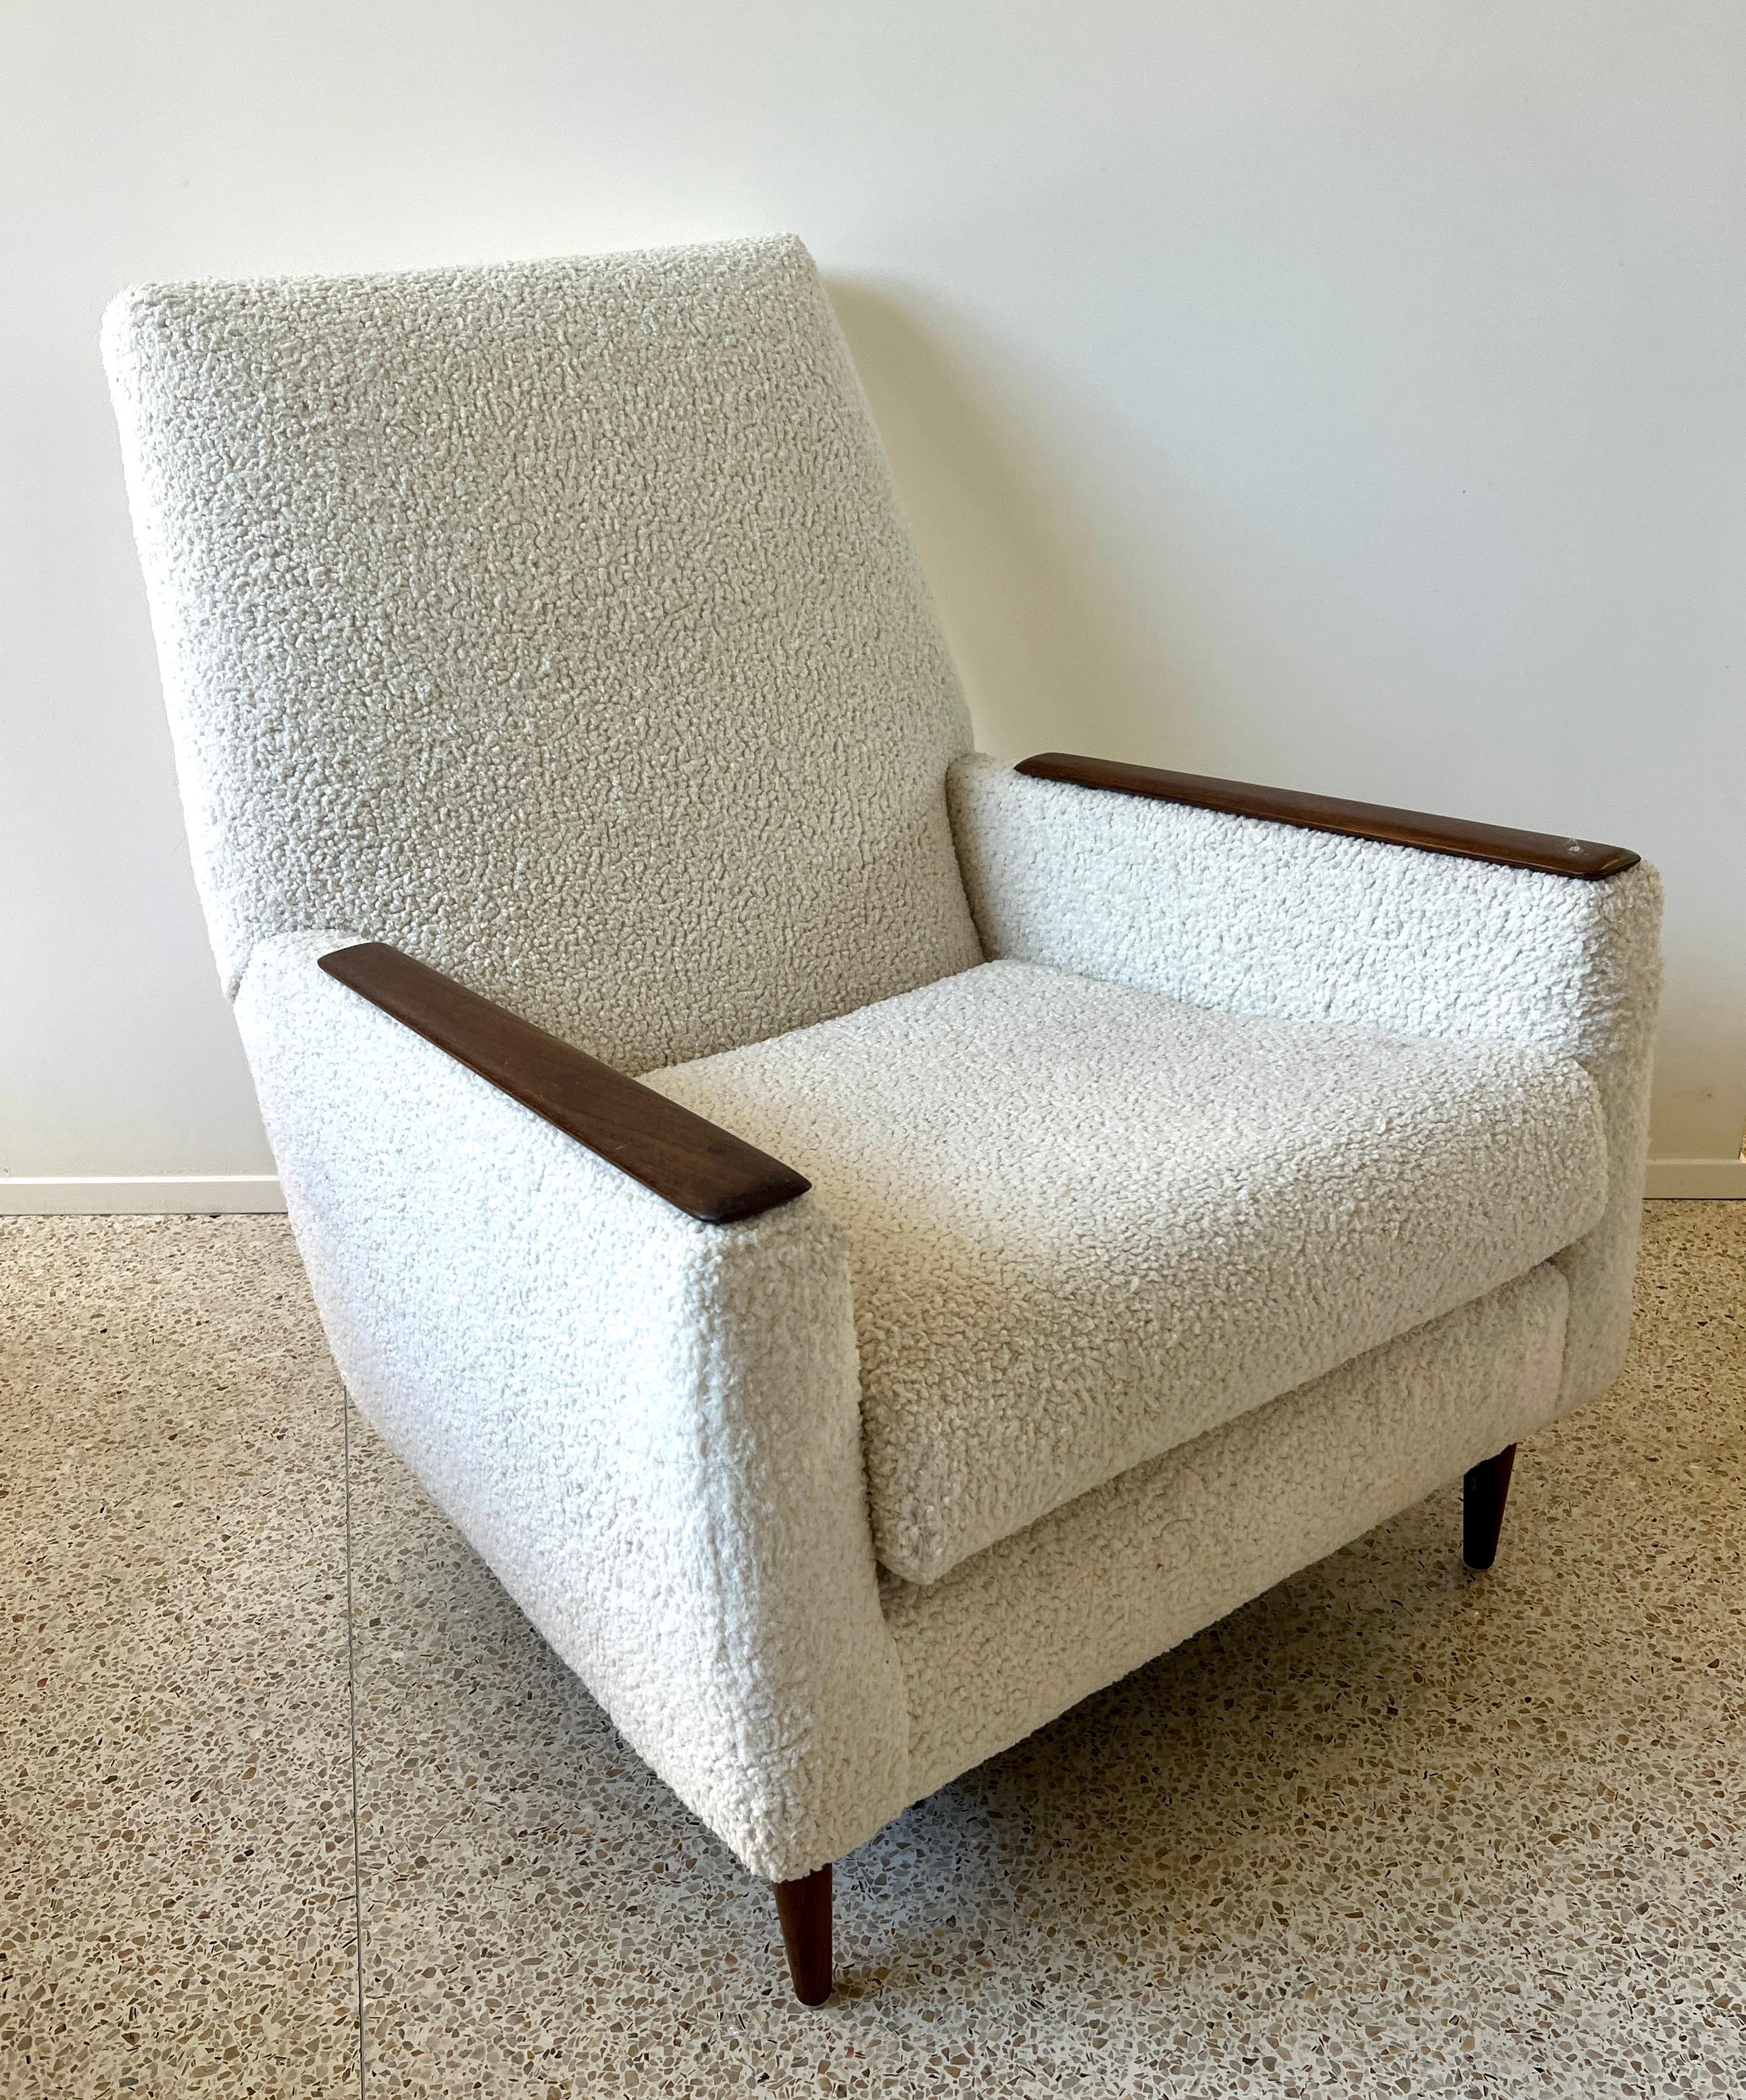 A wonderful and extremely comfortable Mid Century Modern Danish Lounge Chair.

The modern lines and fabric keep this iconic look relevant in any home or space in the 21st Century.   A compliment to any room - Den, office, Bedroom, guest room.. the